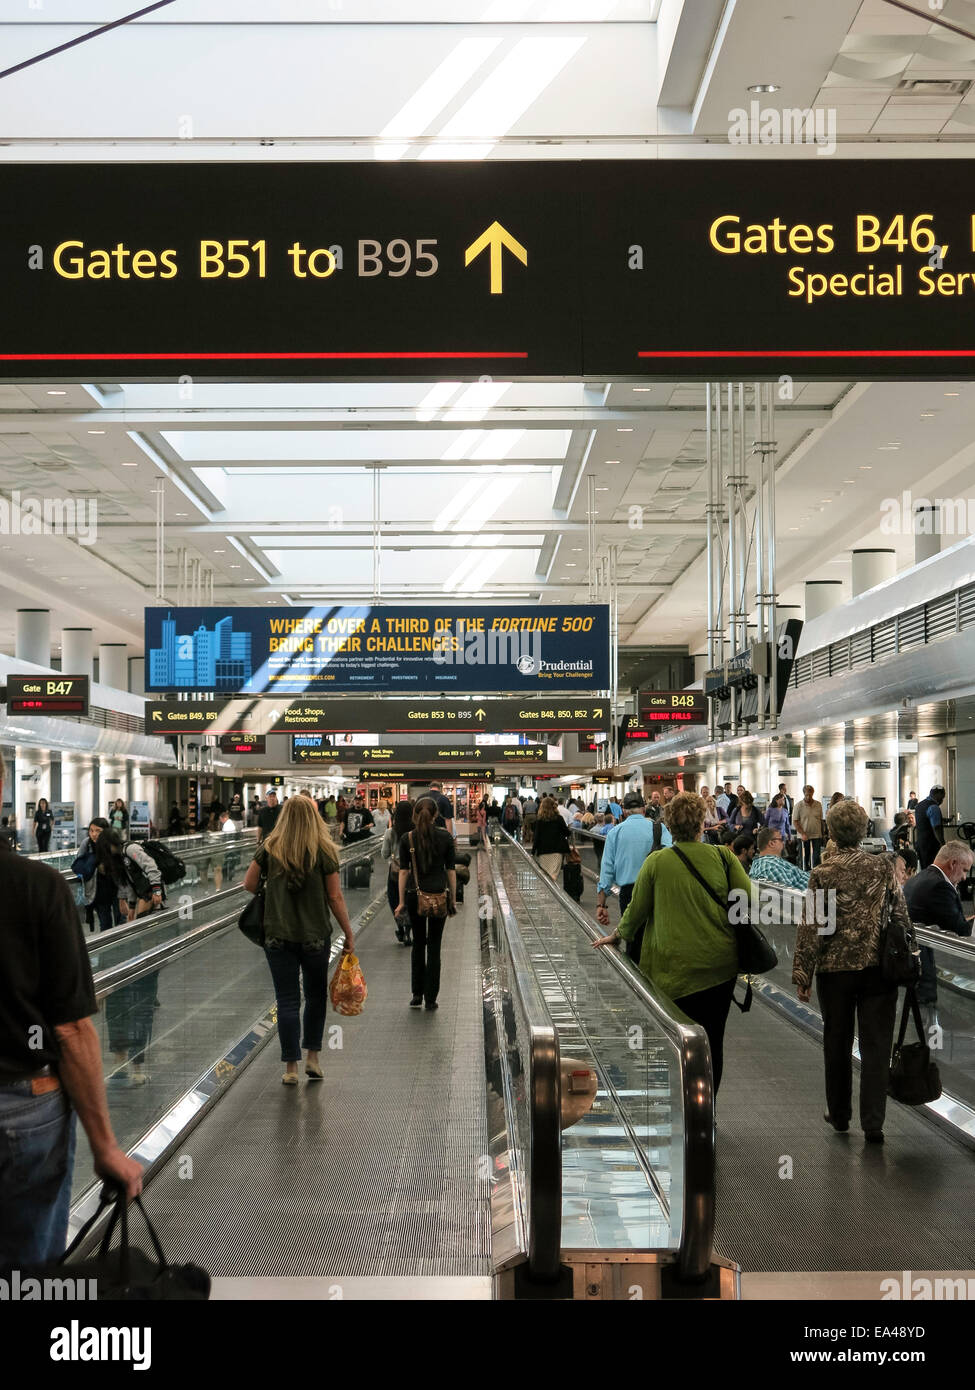 Airport Travelers, Moving Sidewalks and Gates, United Terminal, Denver International Airport, CO Stock Photo